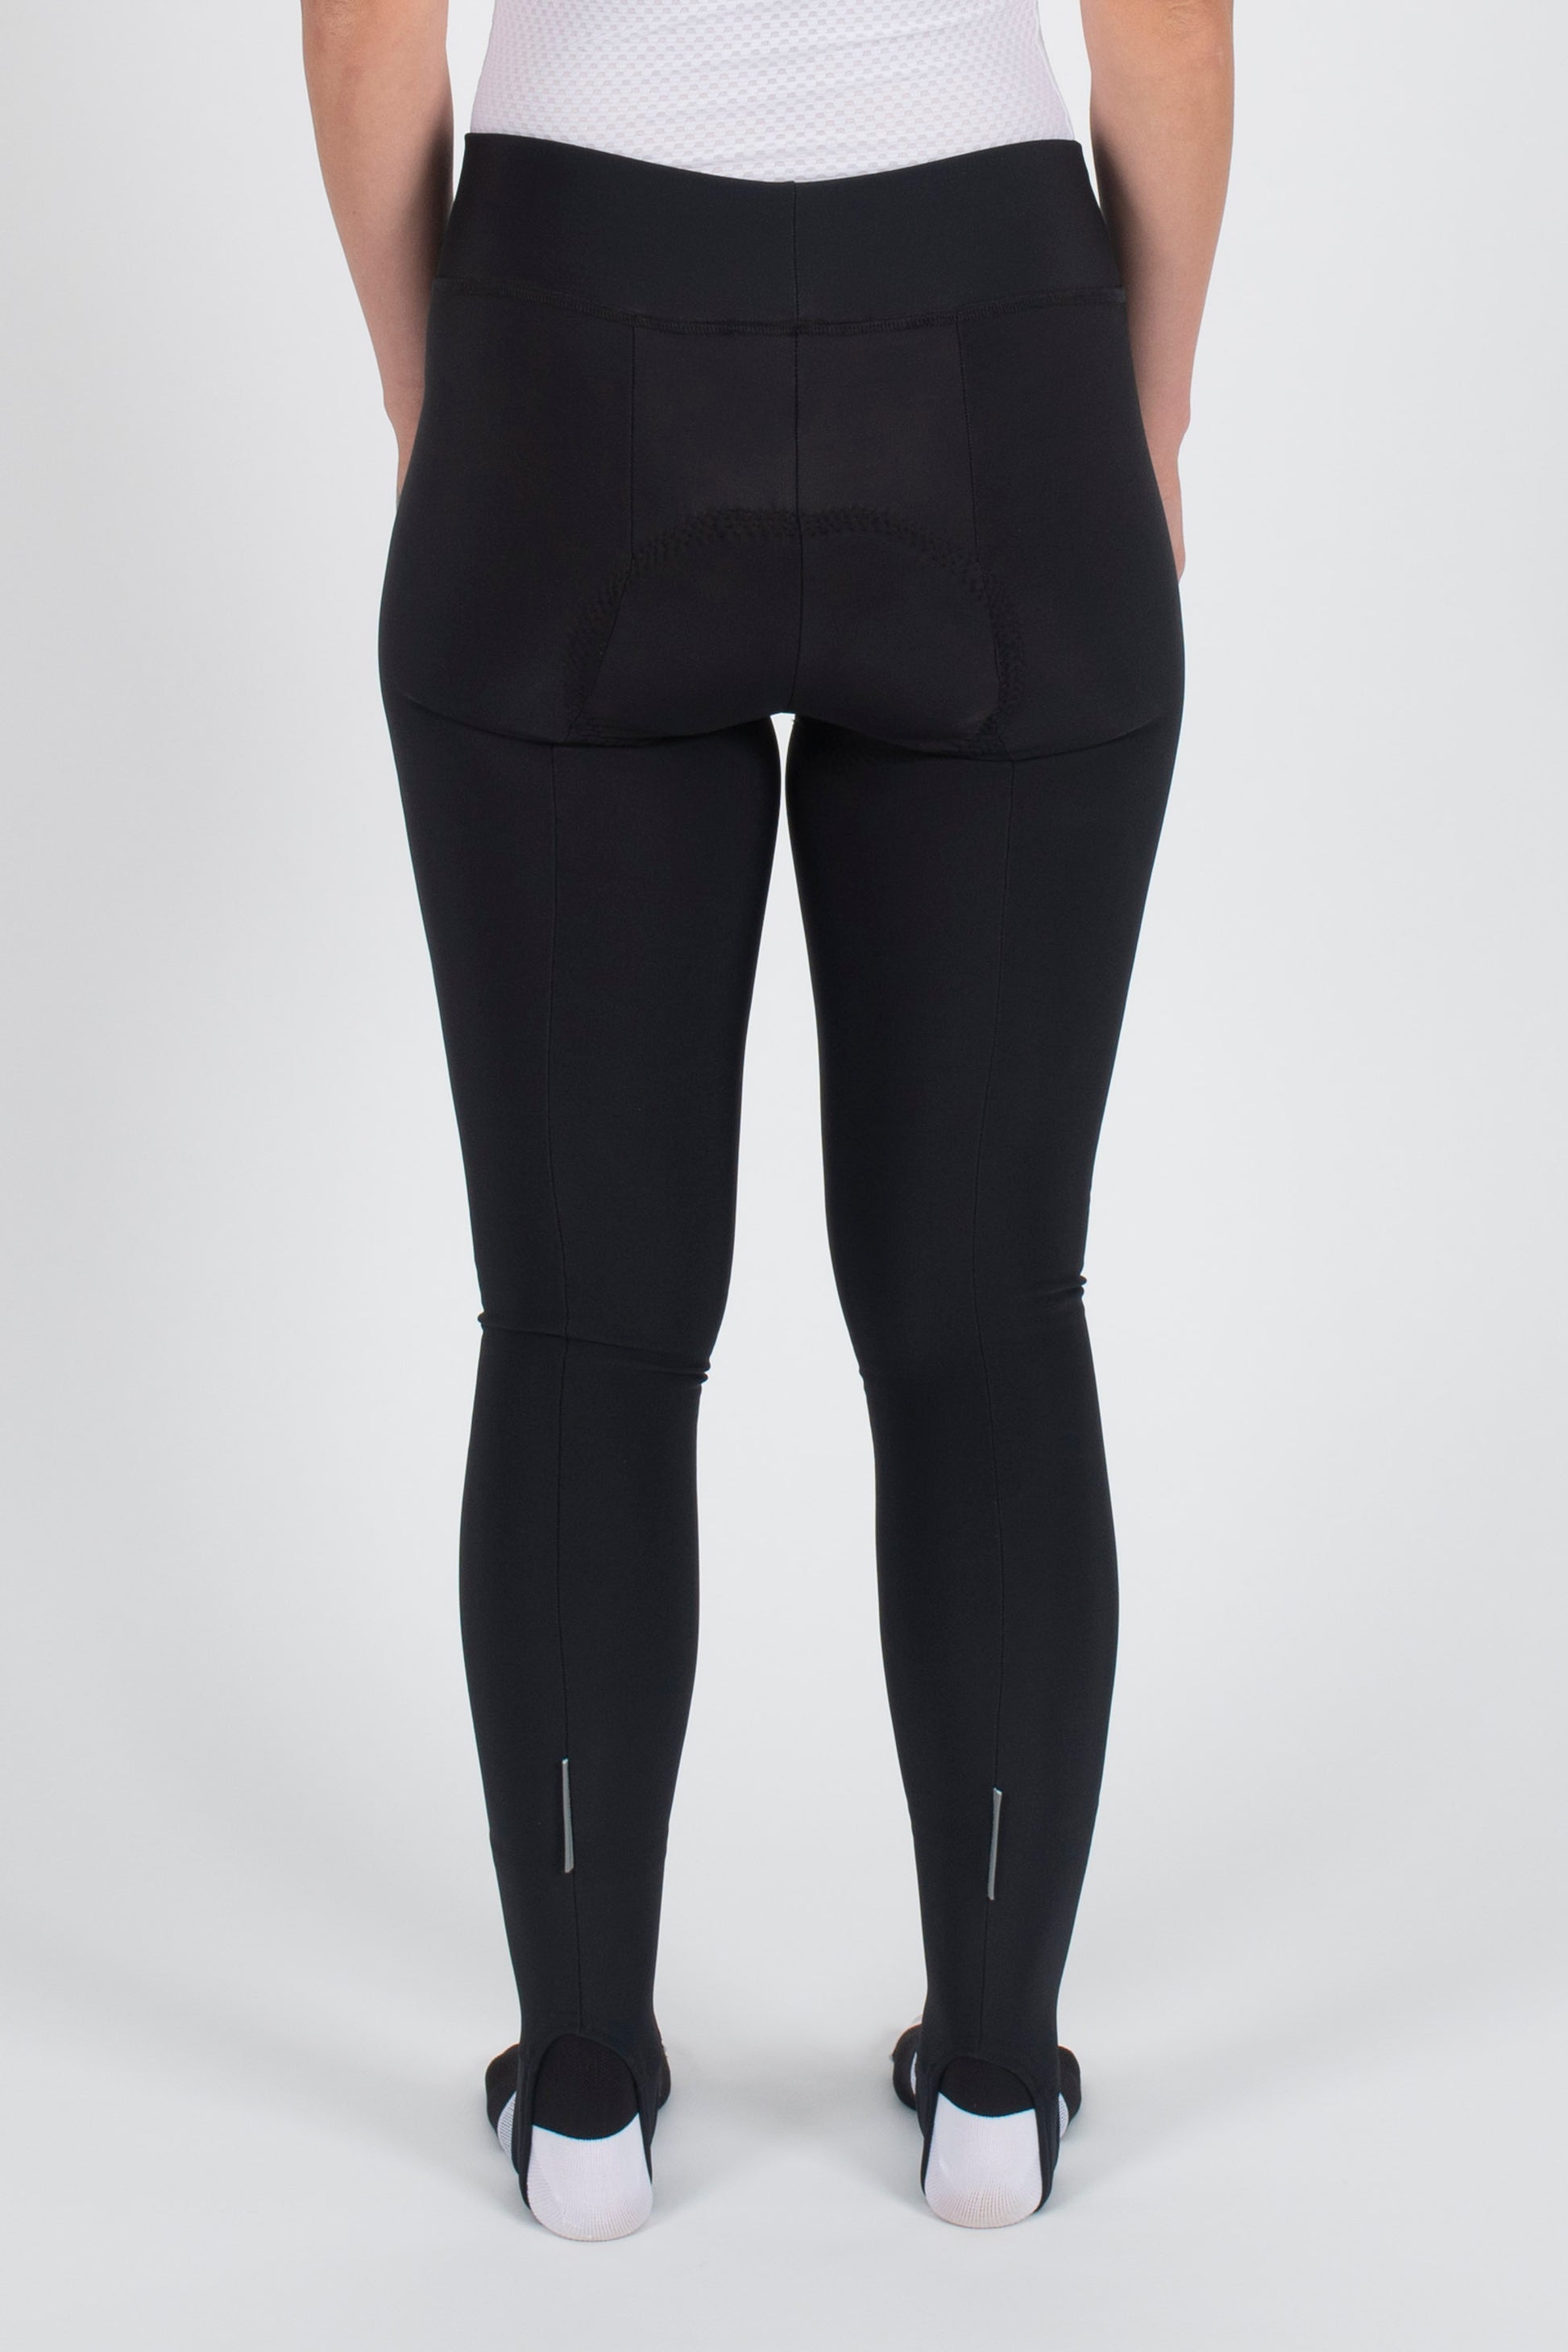 Women's thermal tights - with foot loops